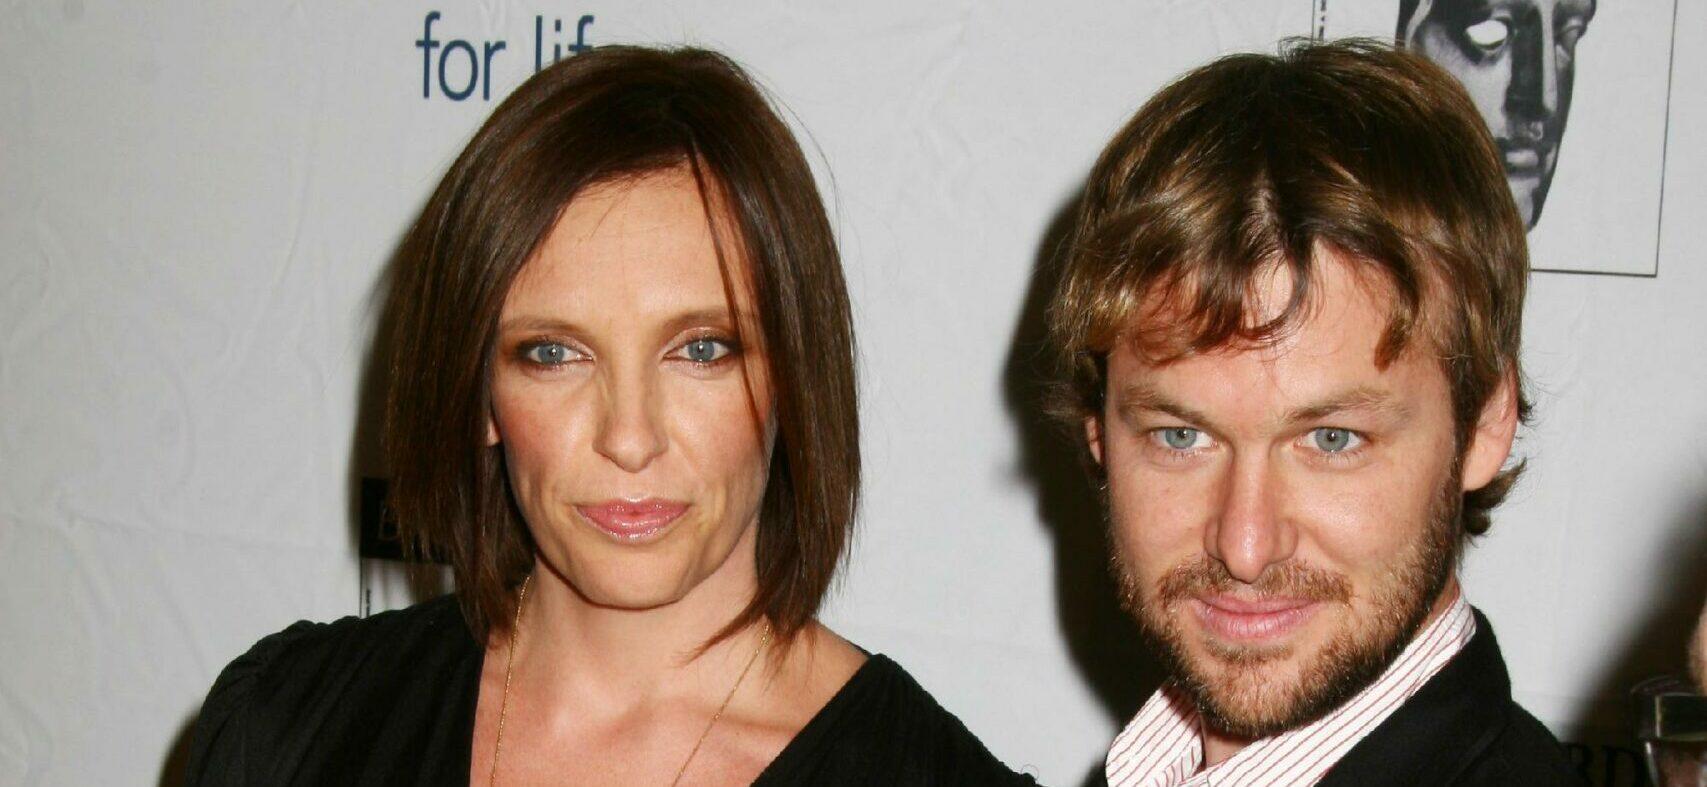 Toni Collette Announces Split From Dave Galafassi After He Was Seen Locking Lips With Mystery Lady